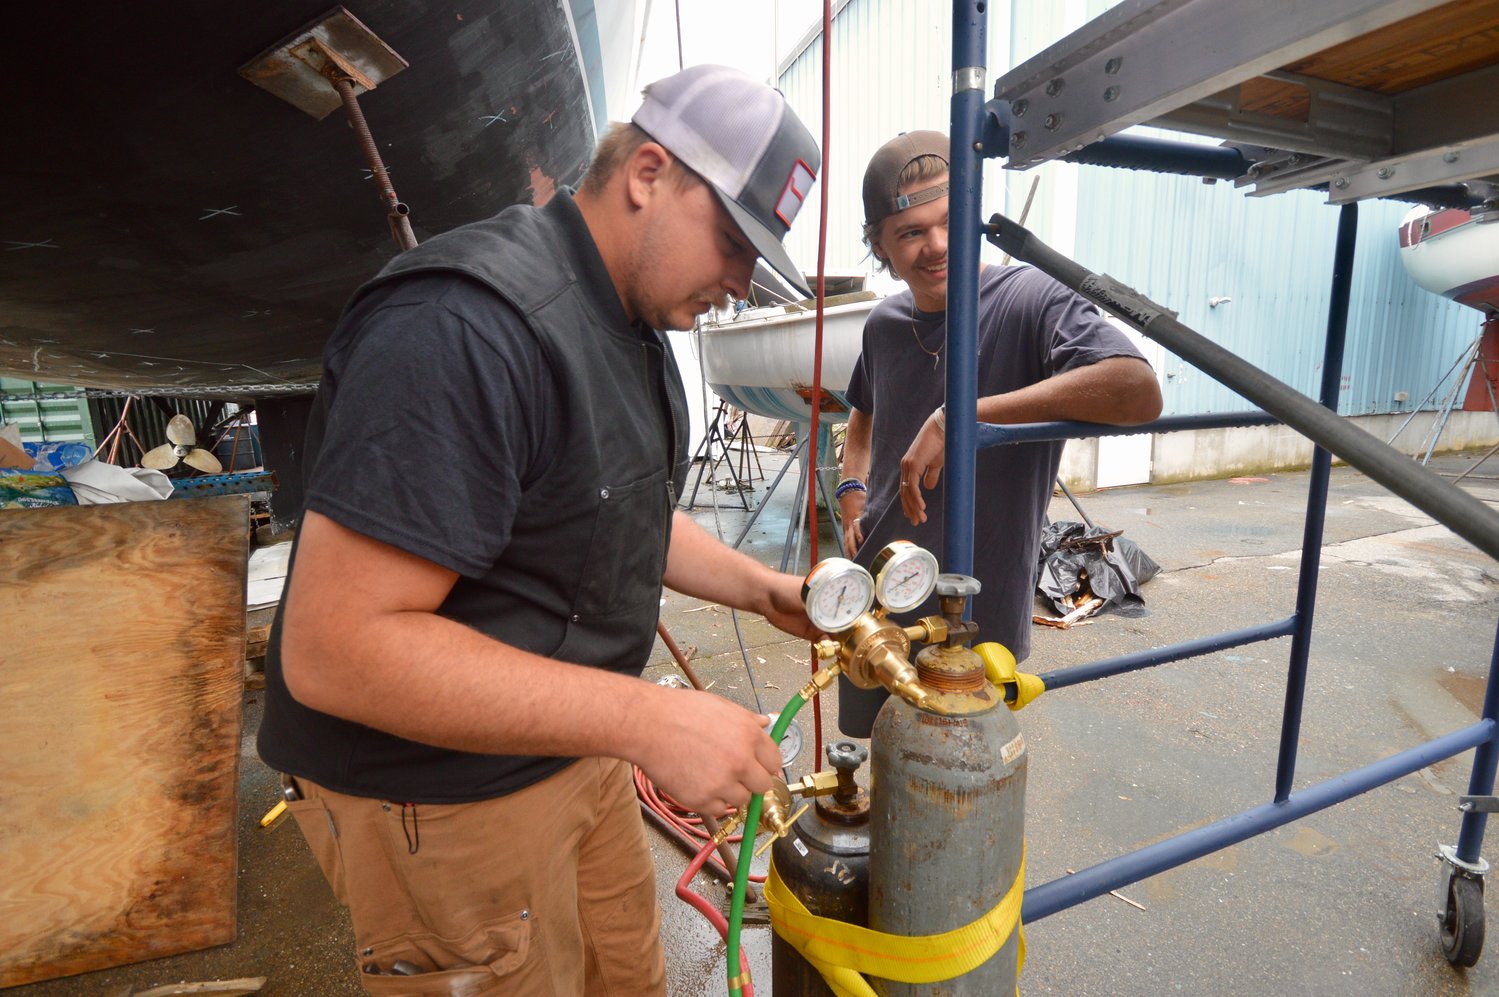 Jasper Fields (left) and Levi Deane Thorson are among of the volunteers getting the boat into shape at Hinckley. Jasper is the son of the boat’s owner, Ty Fields, while Levi is a member of YWAM who will be among the crew members headed to Micronesia.